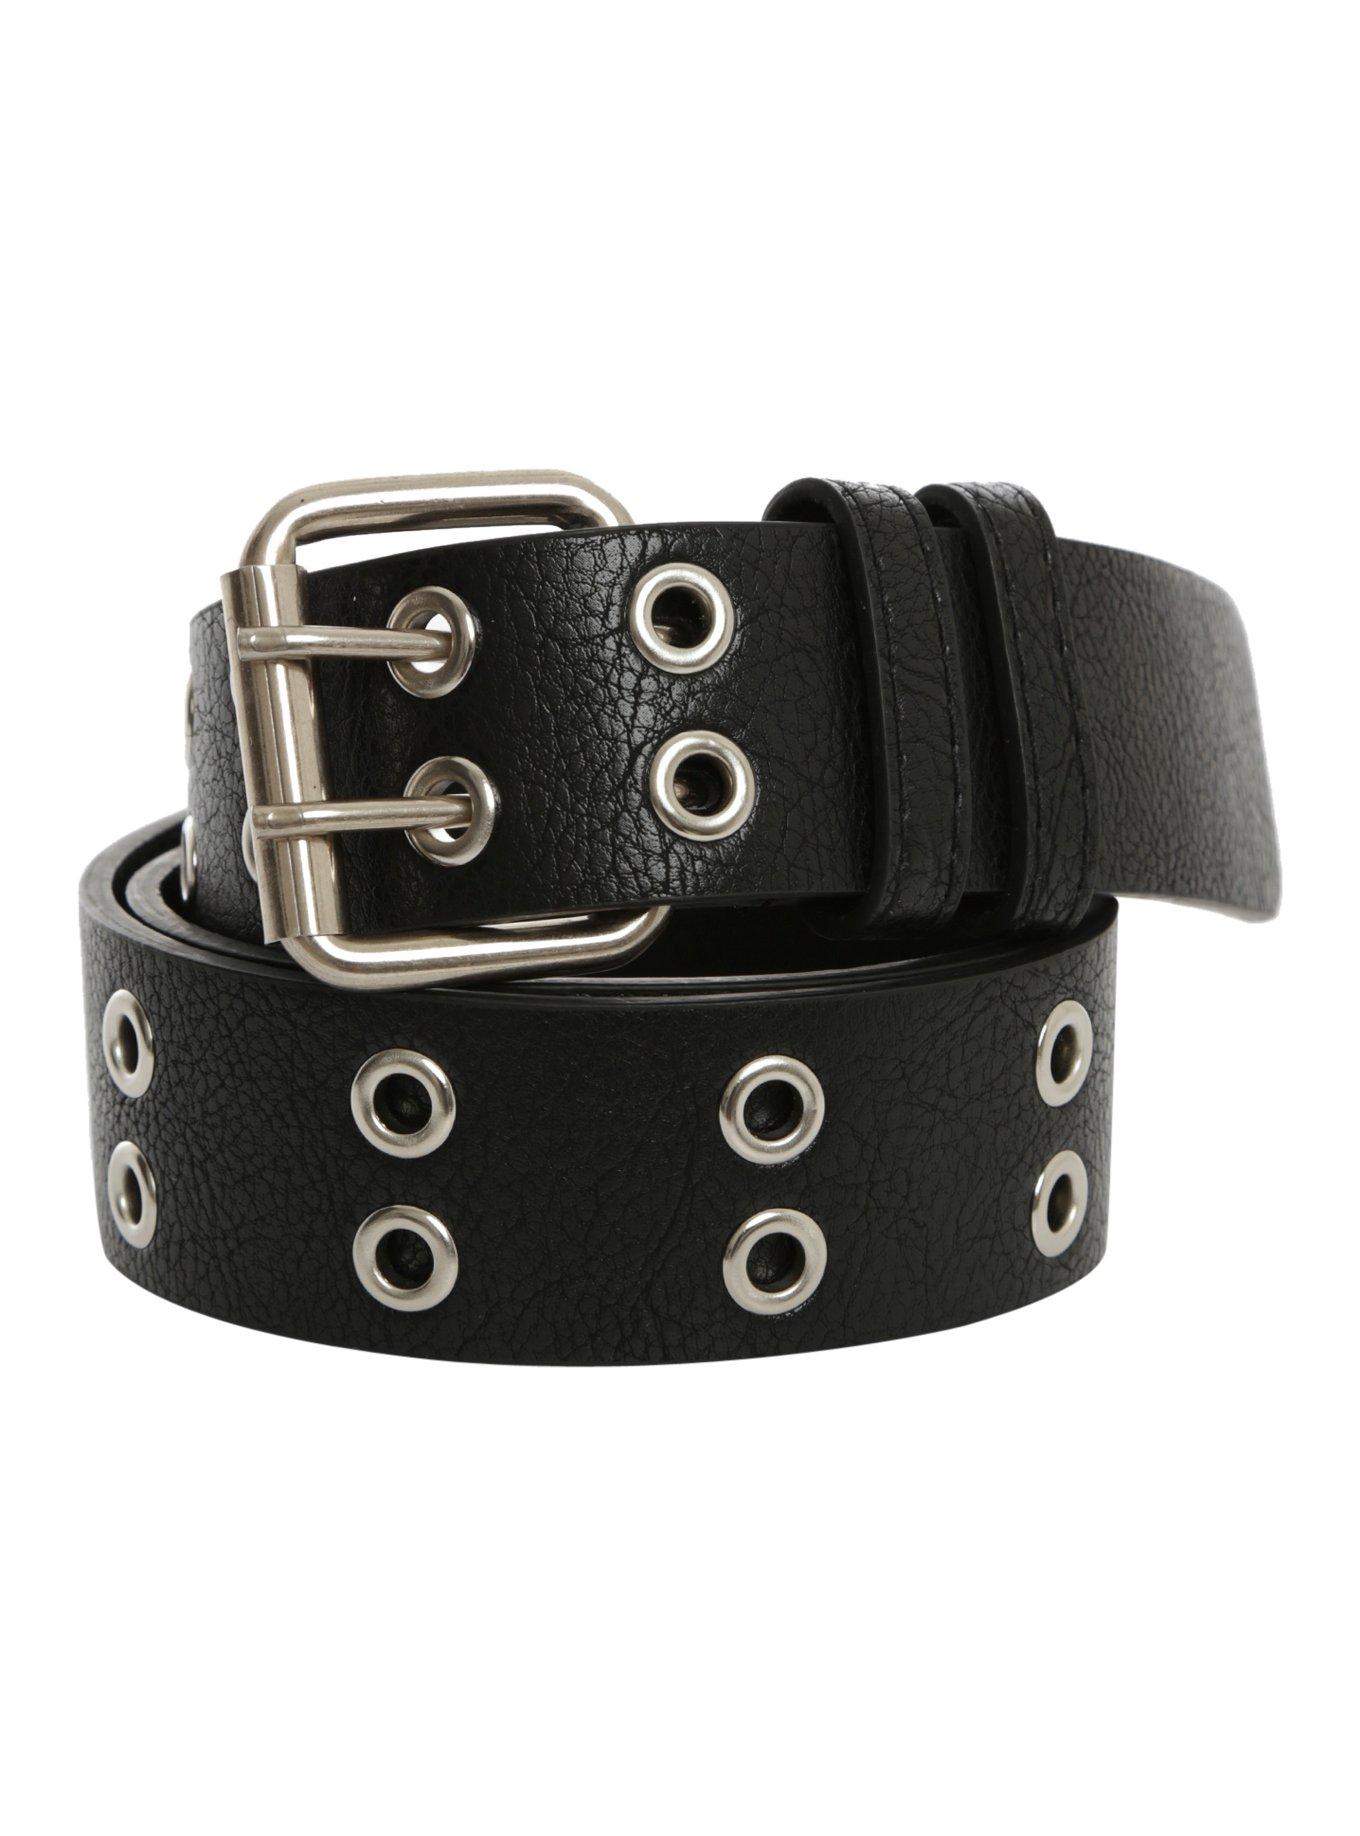 Two-Row Black Faux Leather Silver Grommet Belt | Hot Topic